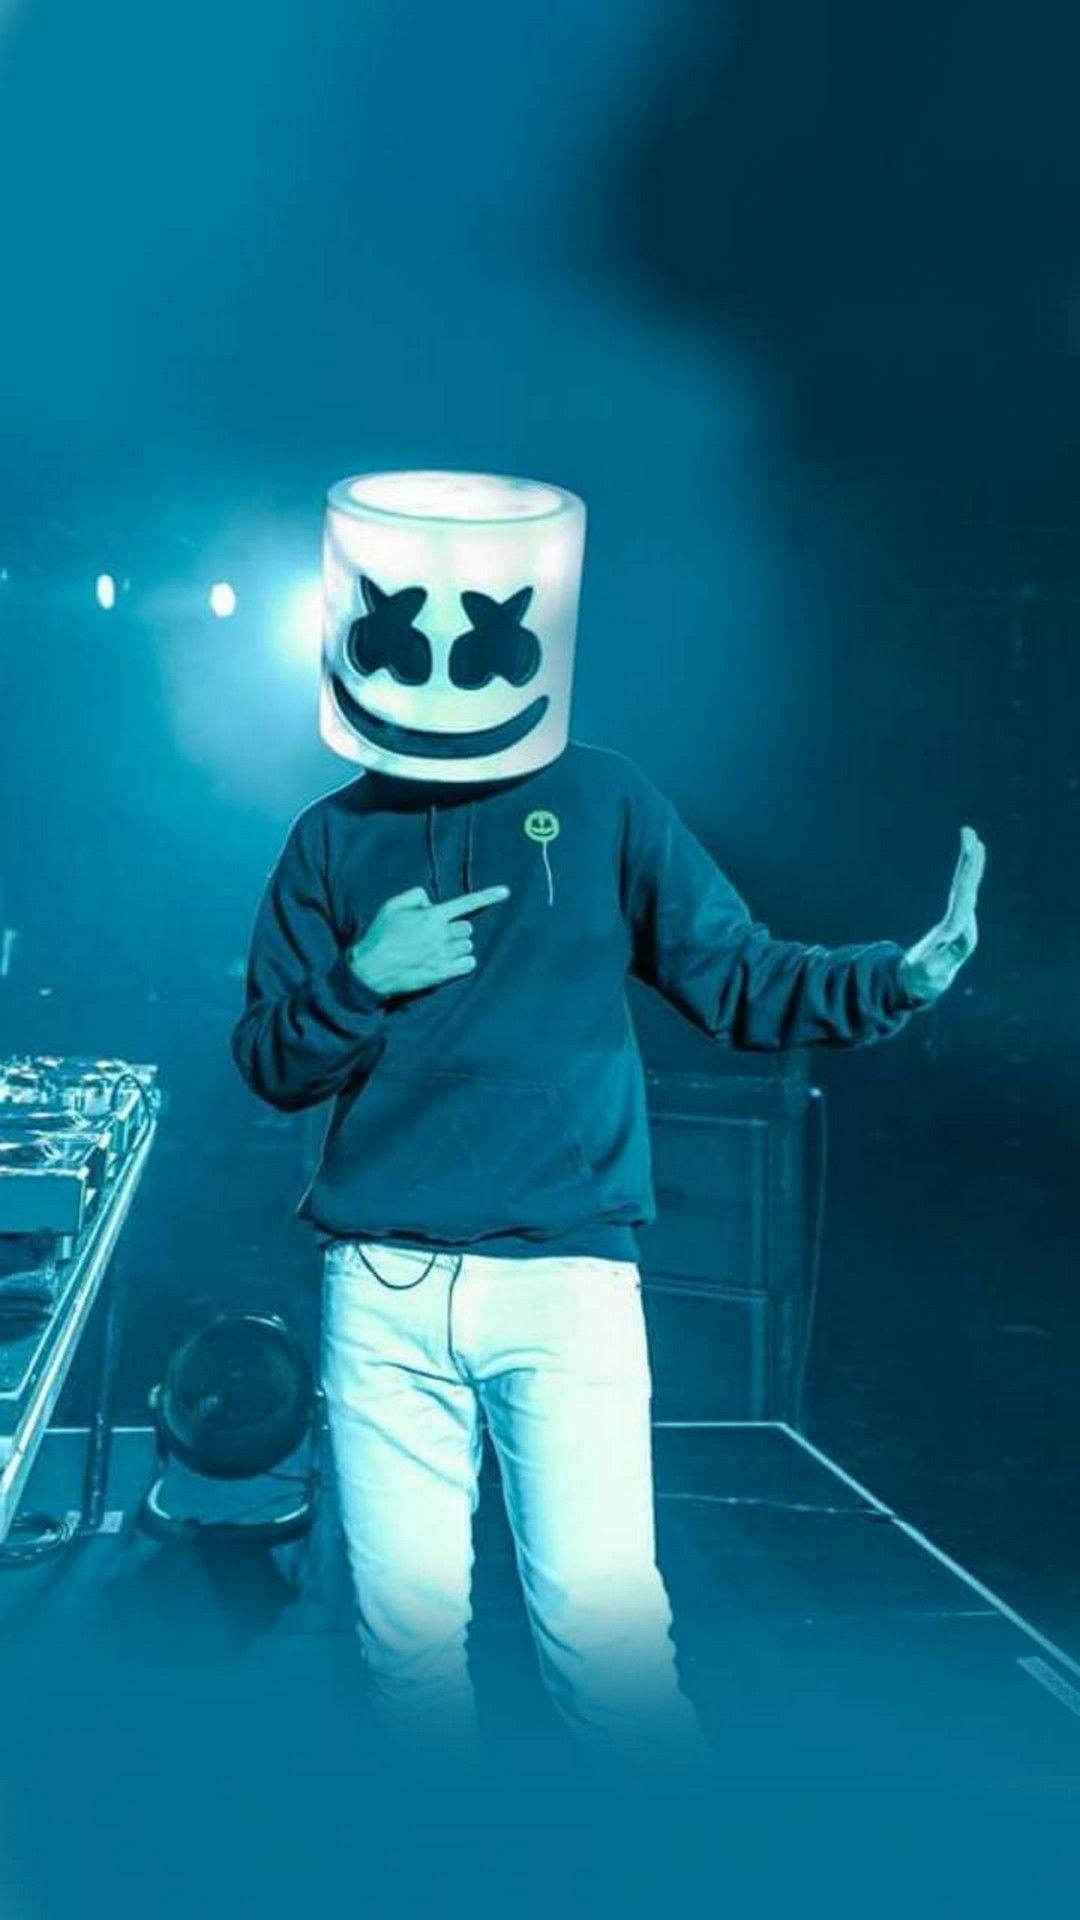 Wallpaper Marshmello for iPhone. Best iphone wallpaper, iPhone